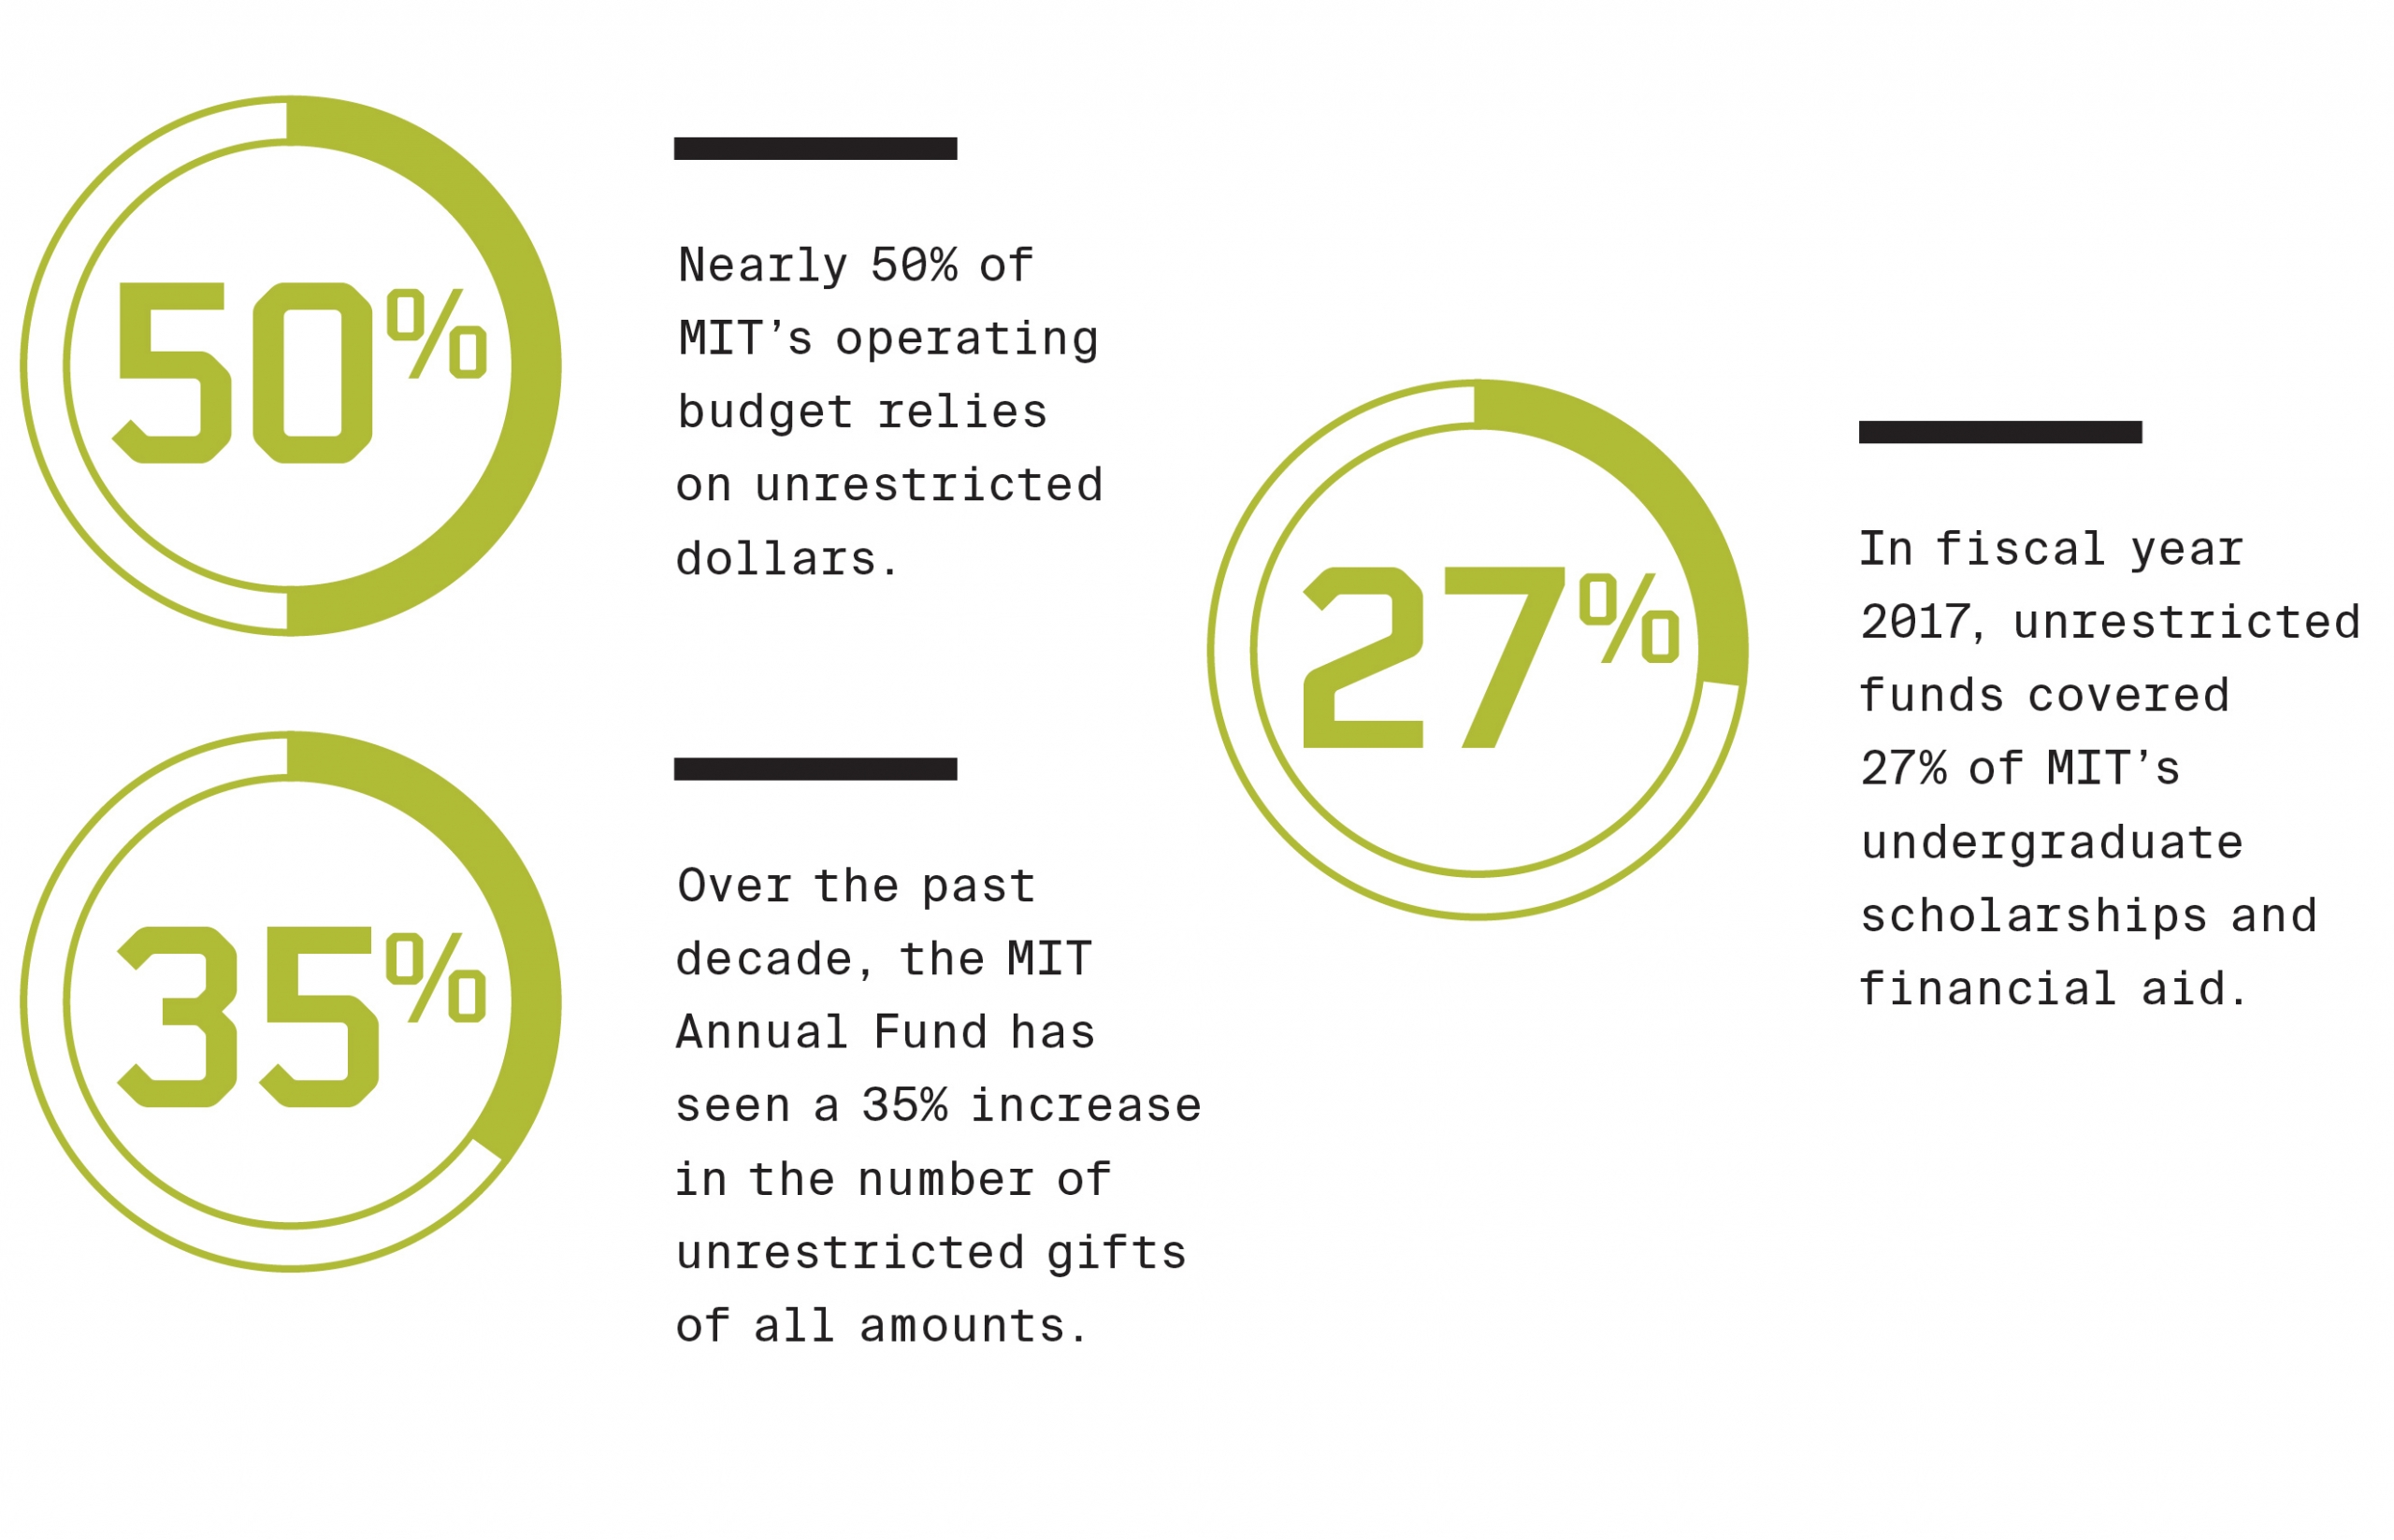 graphic showing following stats - 50% of MIT's operating budget relies on unrestricted dollars, in FY2017 unrestricted funds covered 27% of MIT's undergraduate scholarships and financial aid, over the past decade the MIT Annual Fund has seen a 35% increase in the number of unrestricted gifts of all amounts